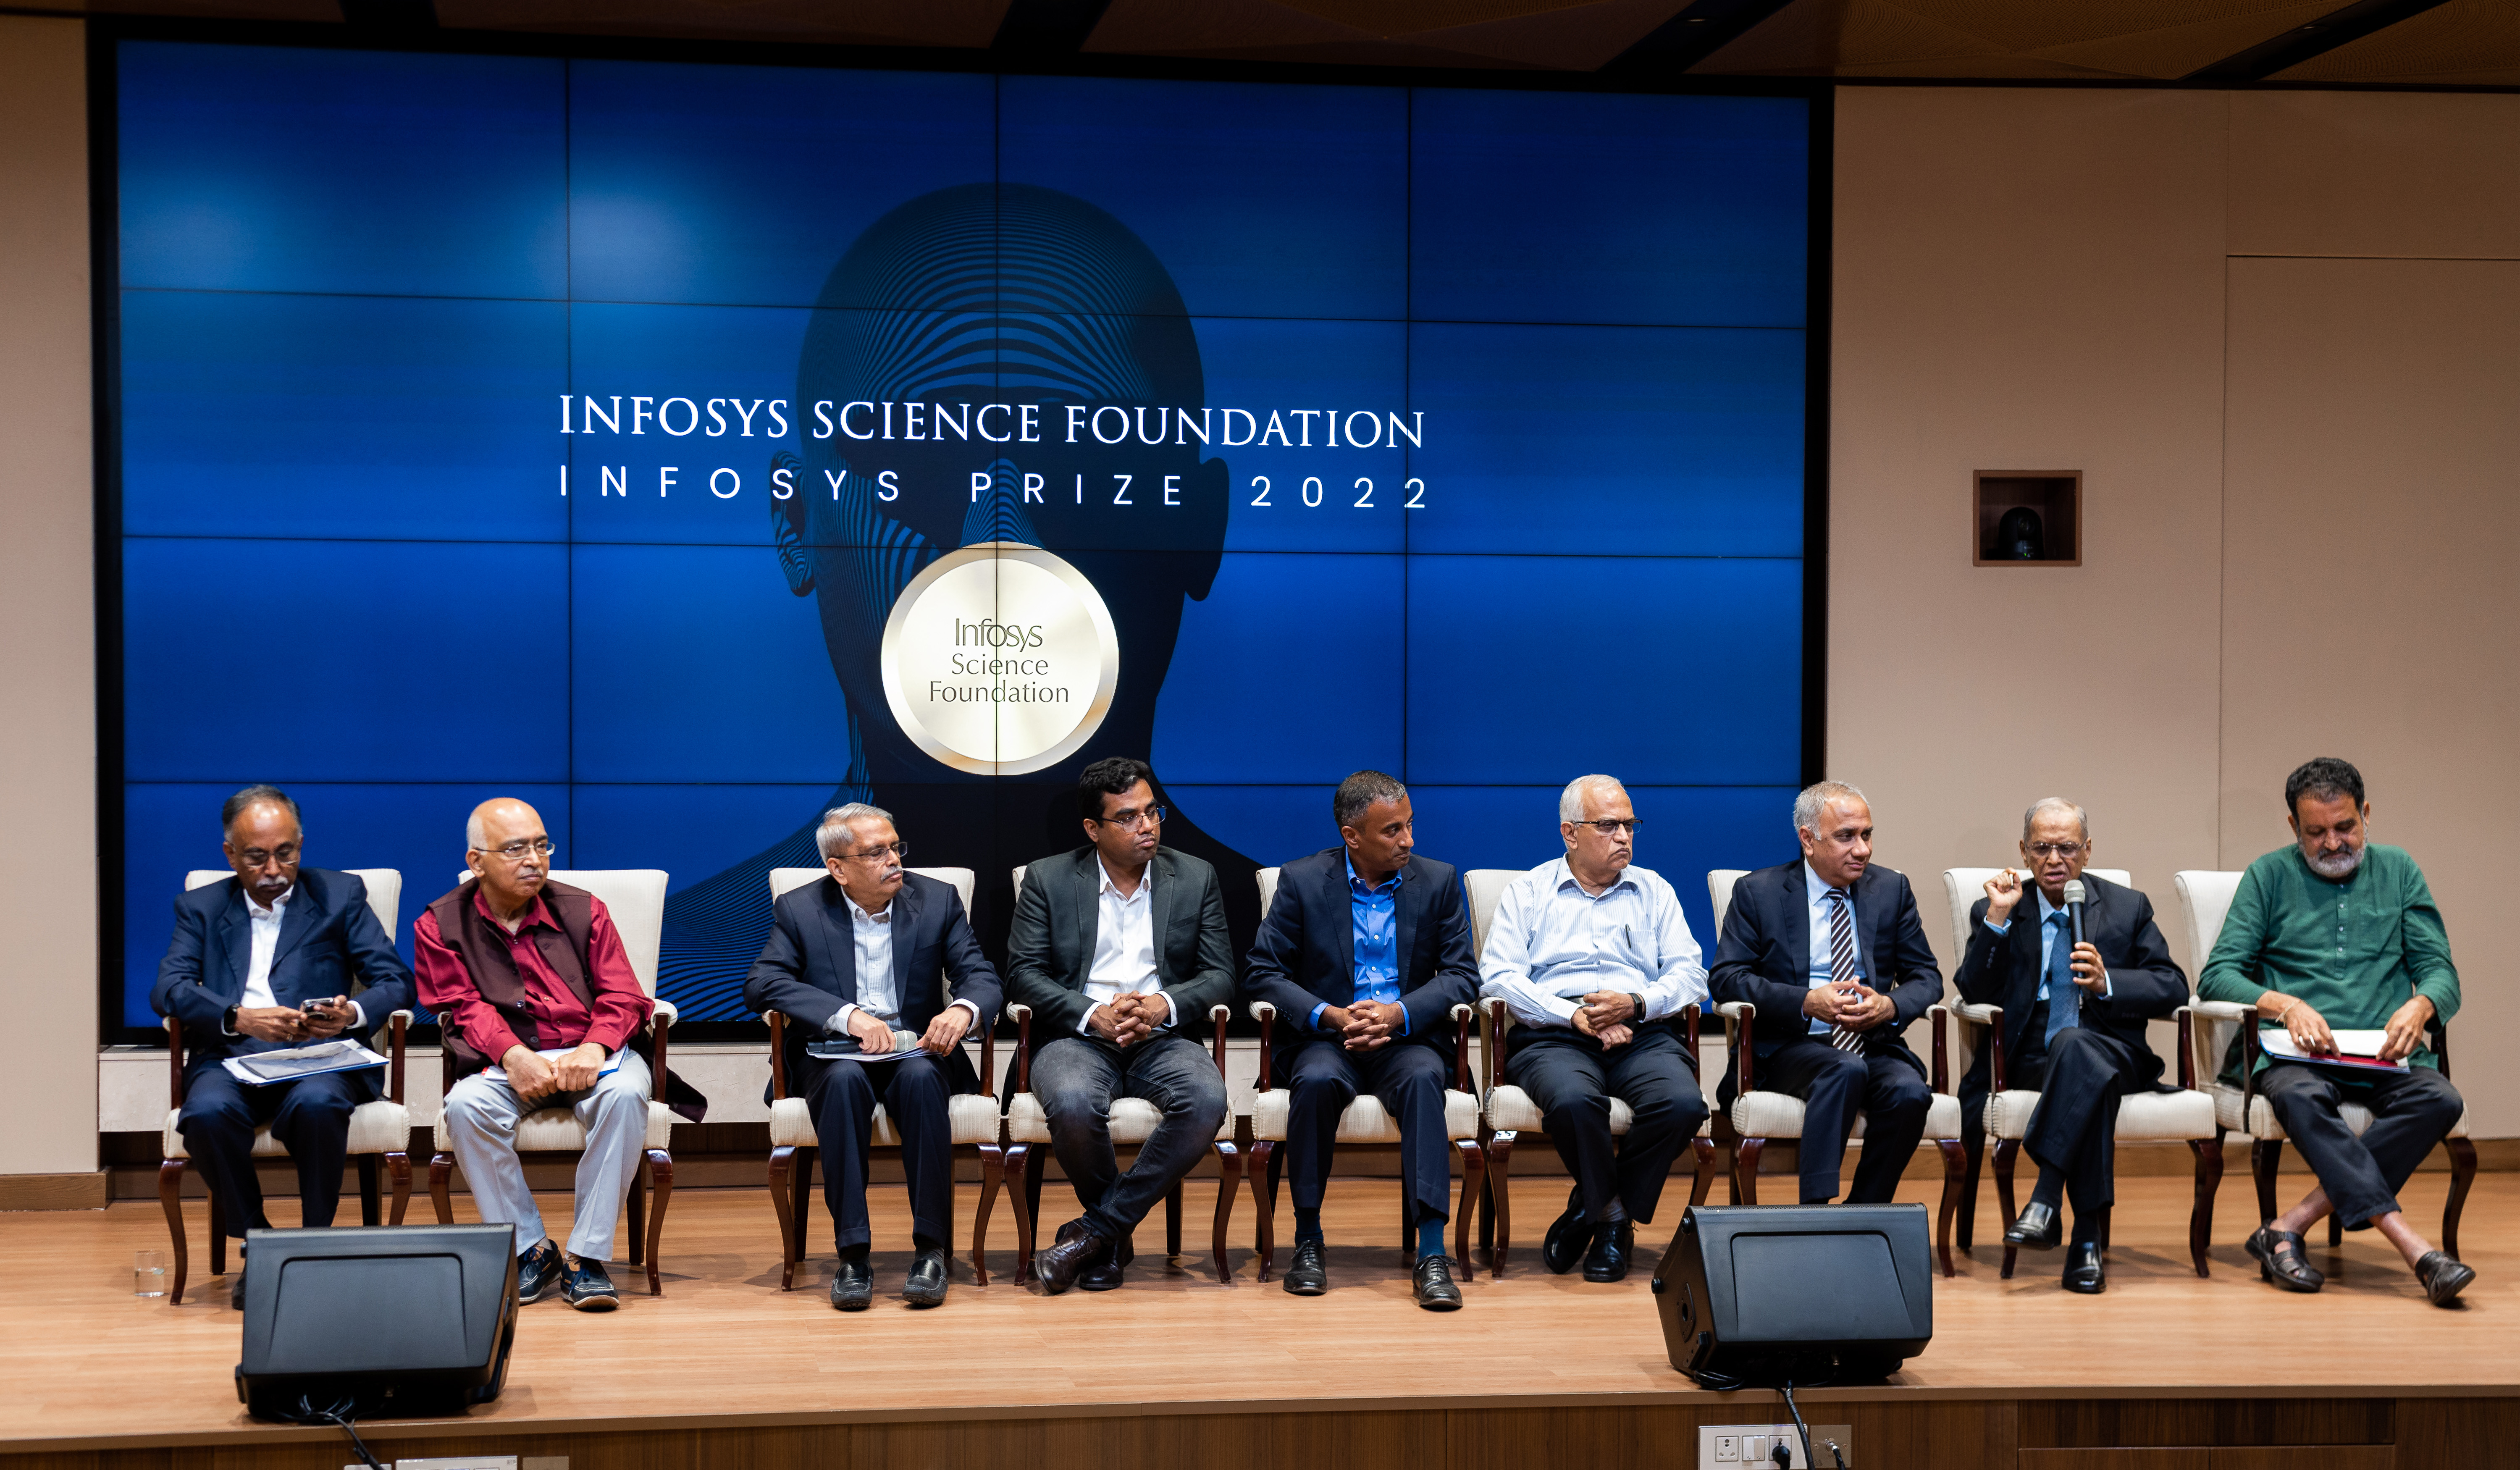 Infosys Prize 2022 Announcement and Press Conference on Nov 15, 2022